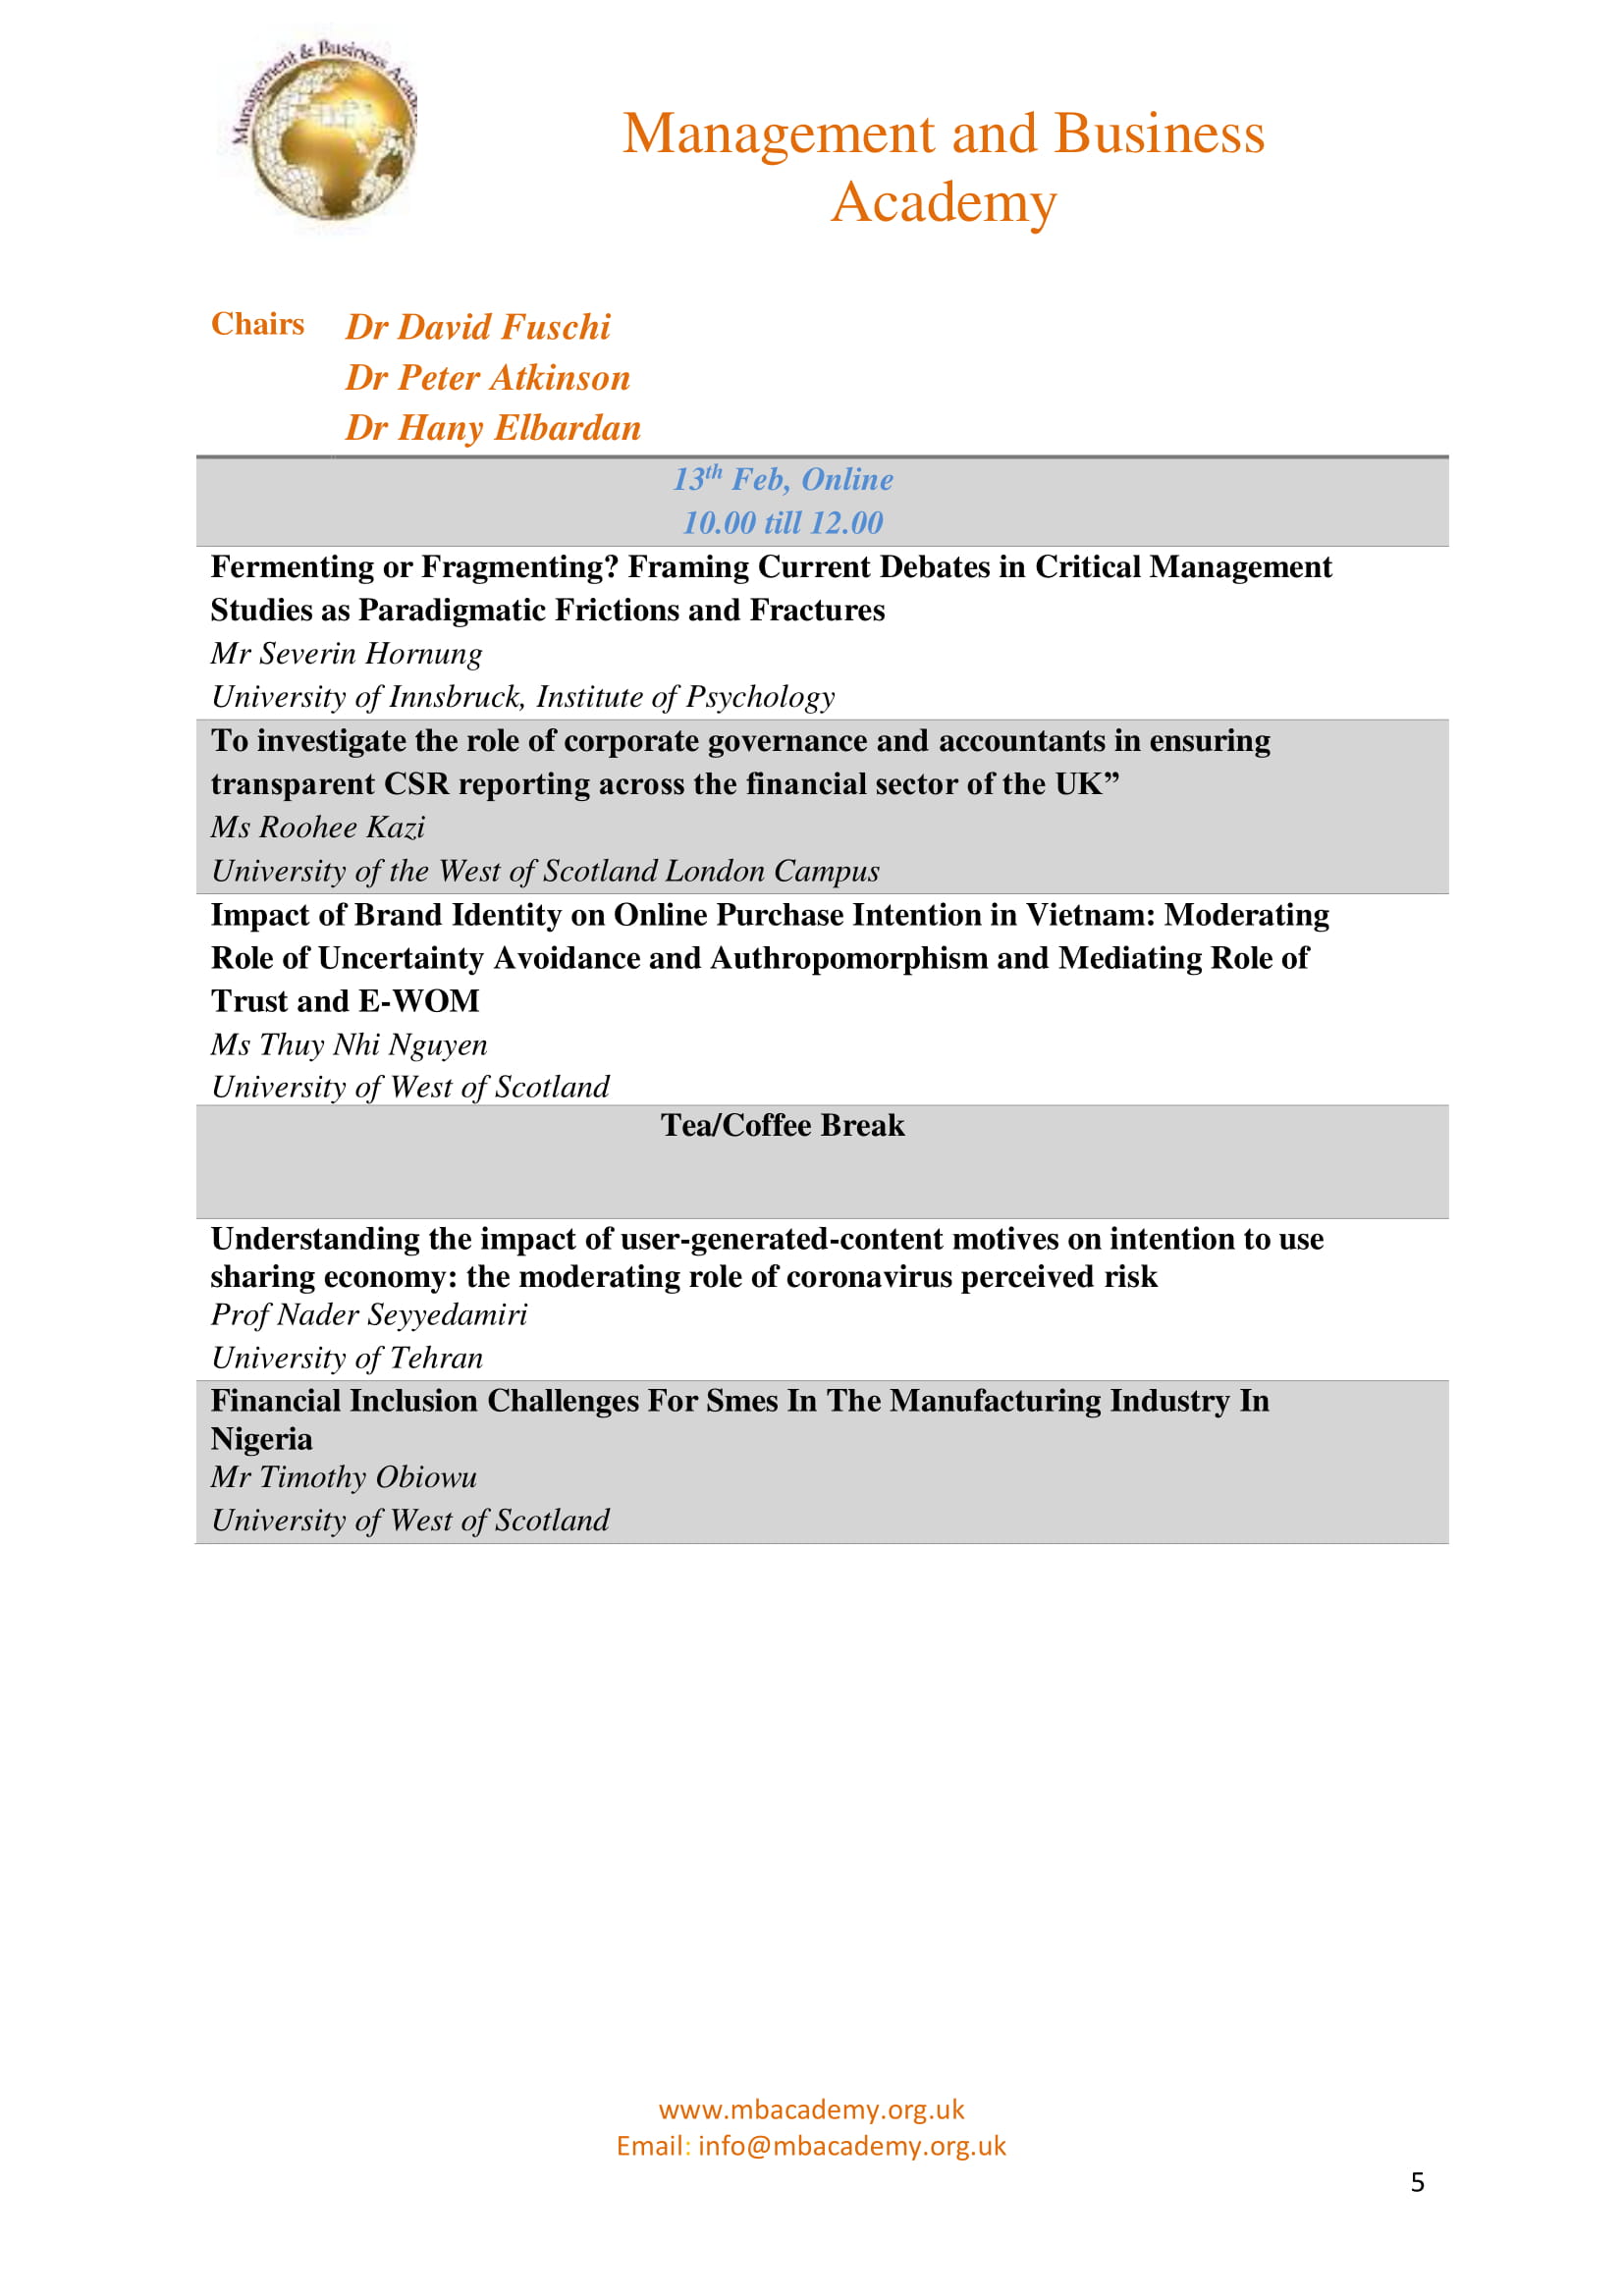 conference programme 5